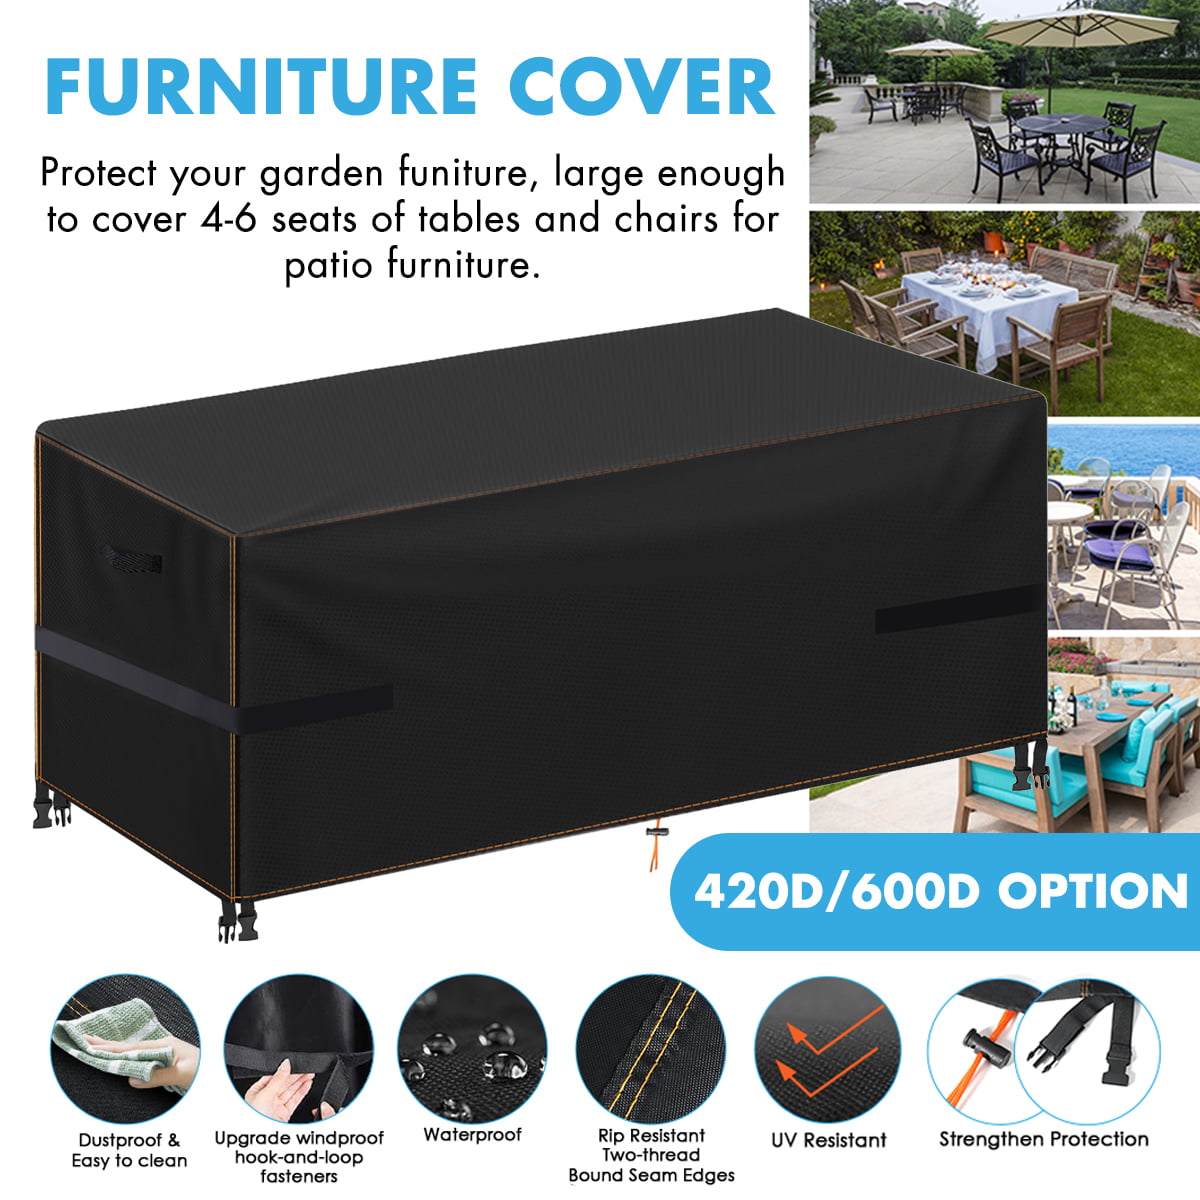 L 72 x W 46 x H 28 Outdoor Dining Table Cover Patio Furniture Set Covers 420D Heavy Duty Canvas Rectangle Patio Table Cover Waterproof Outdoor Patio Furniture Covers with Durable Hem Cord 